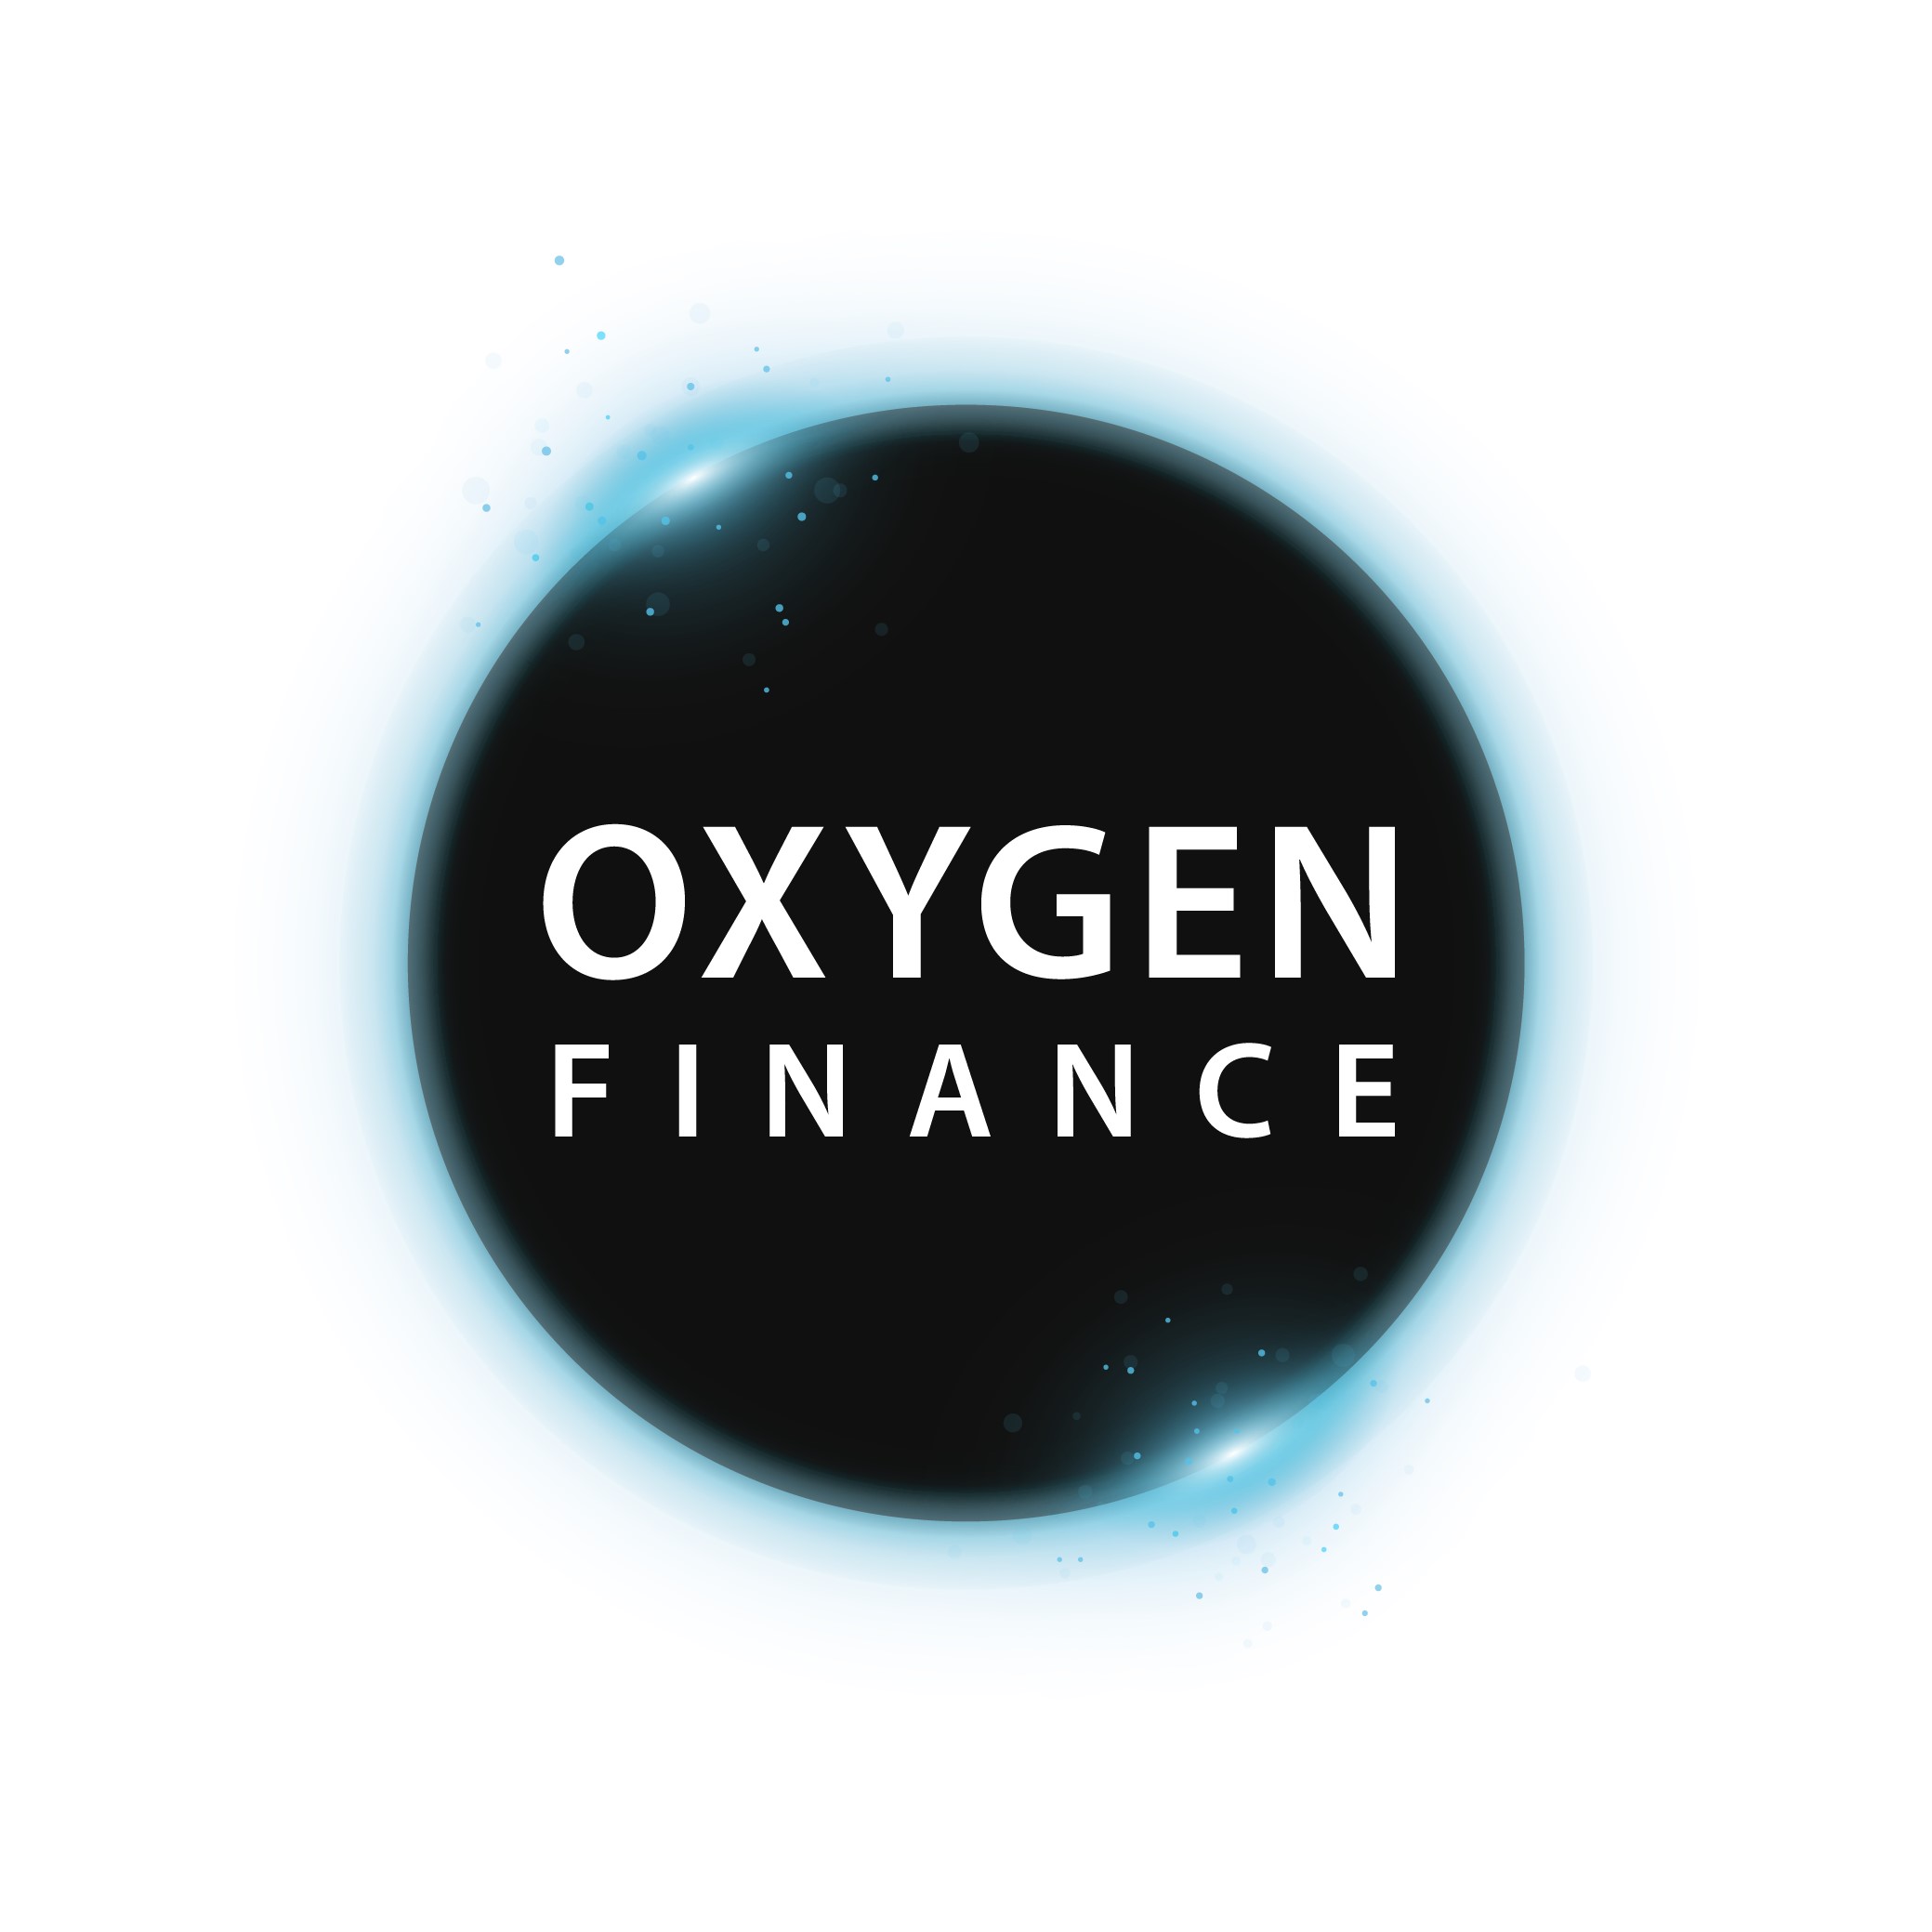 Rejected Indicative Offer for Oxygen